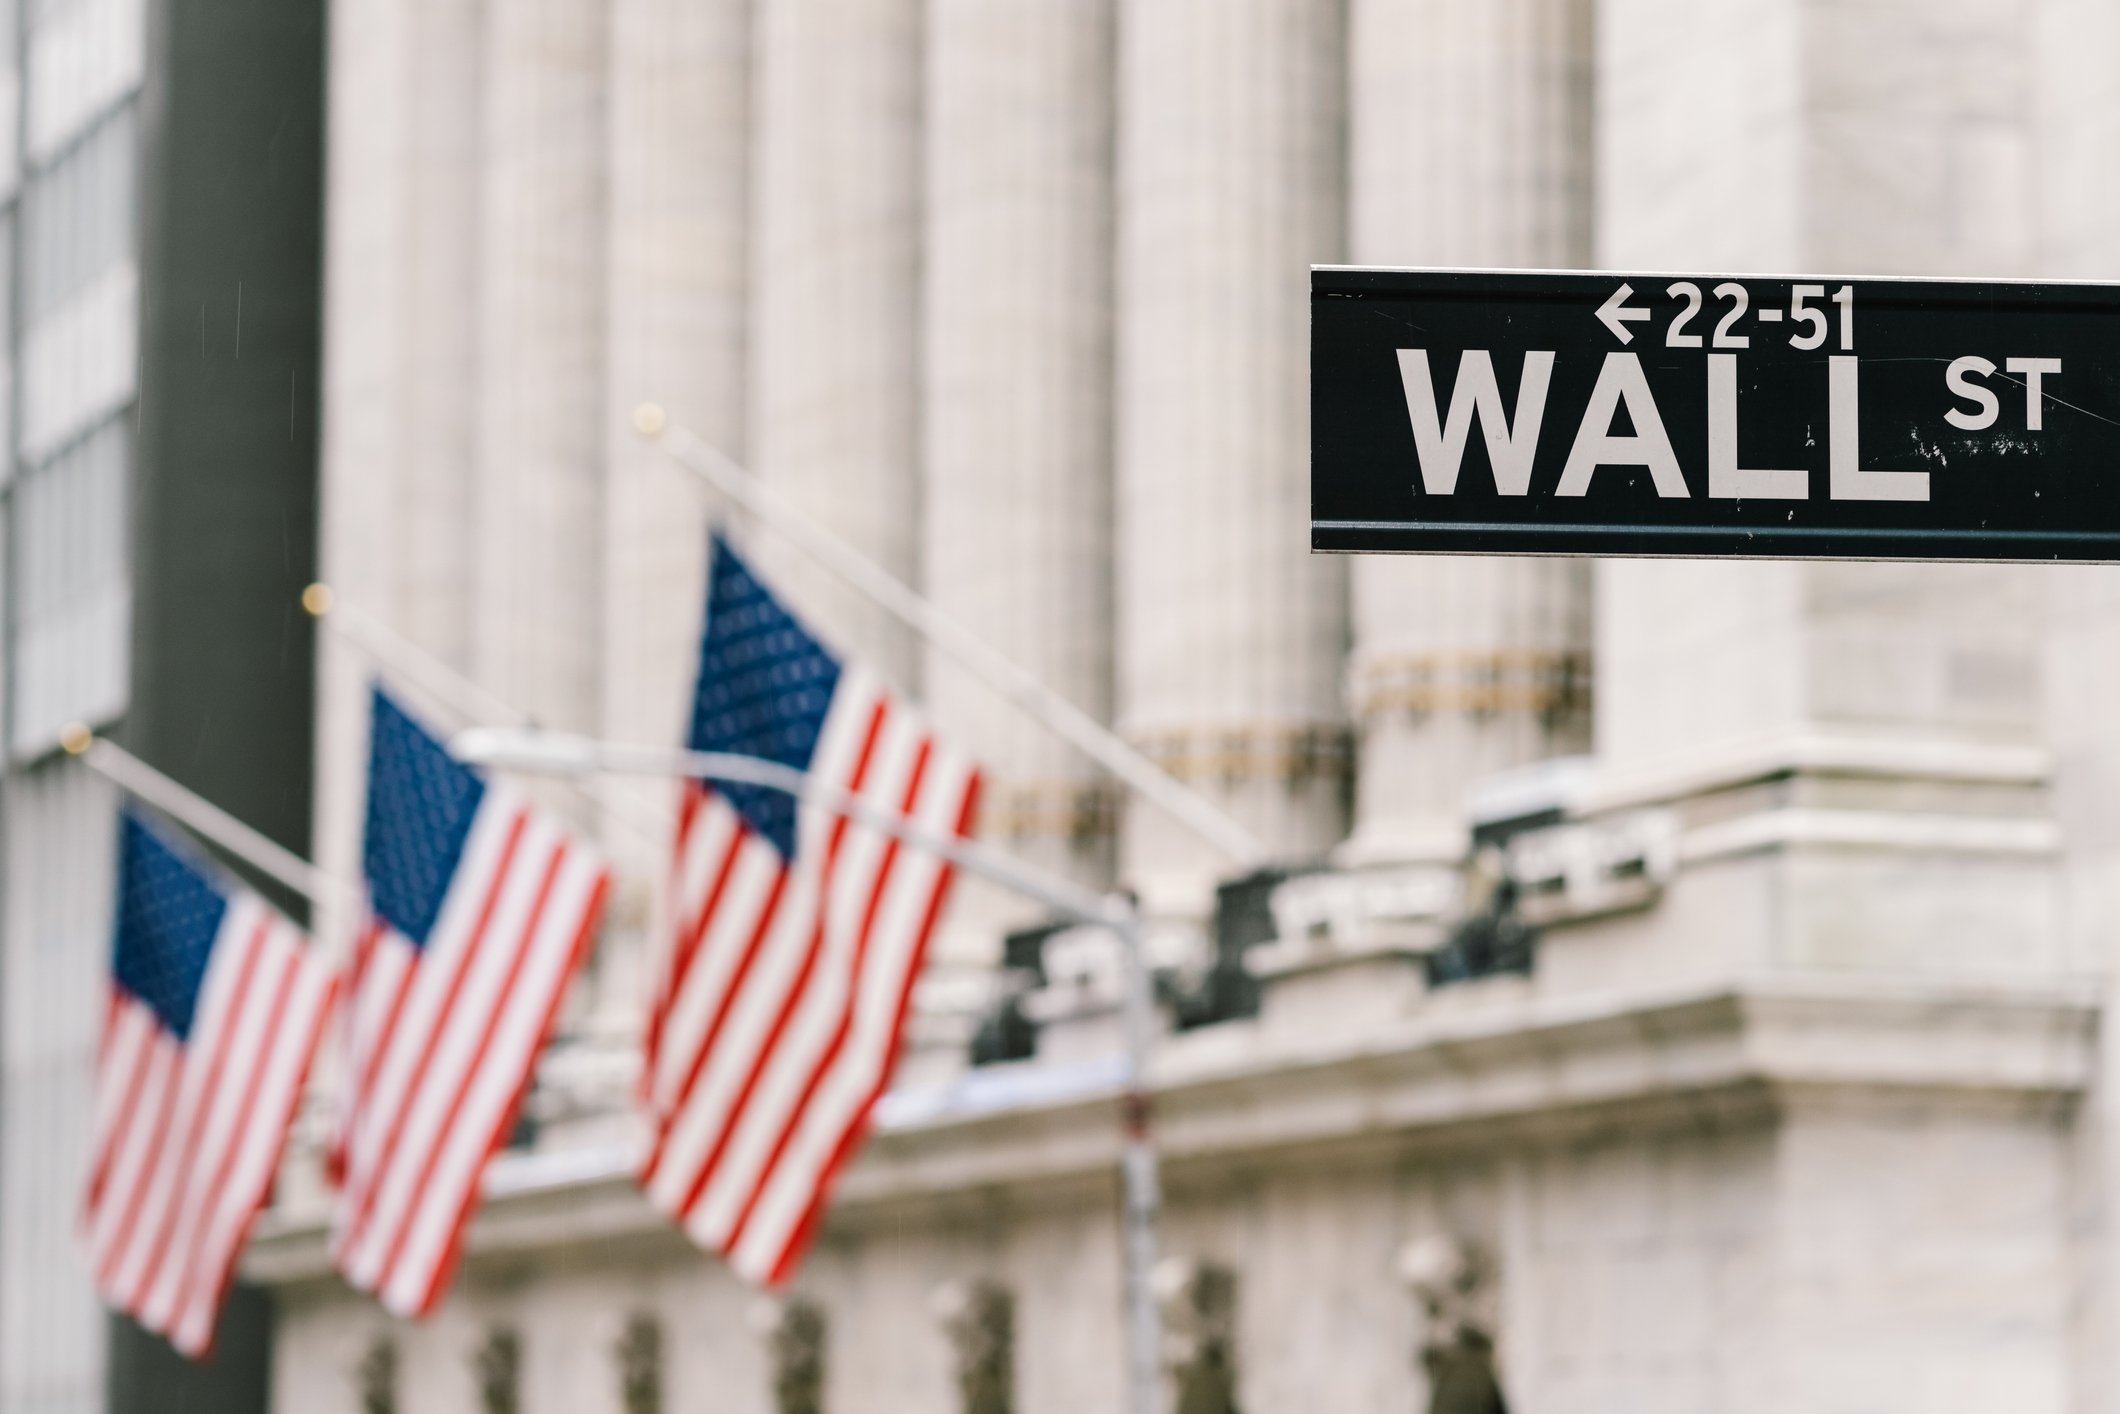 Photo of Wall Street street sign with american flags in the background